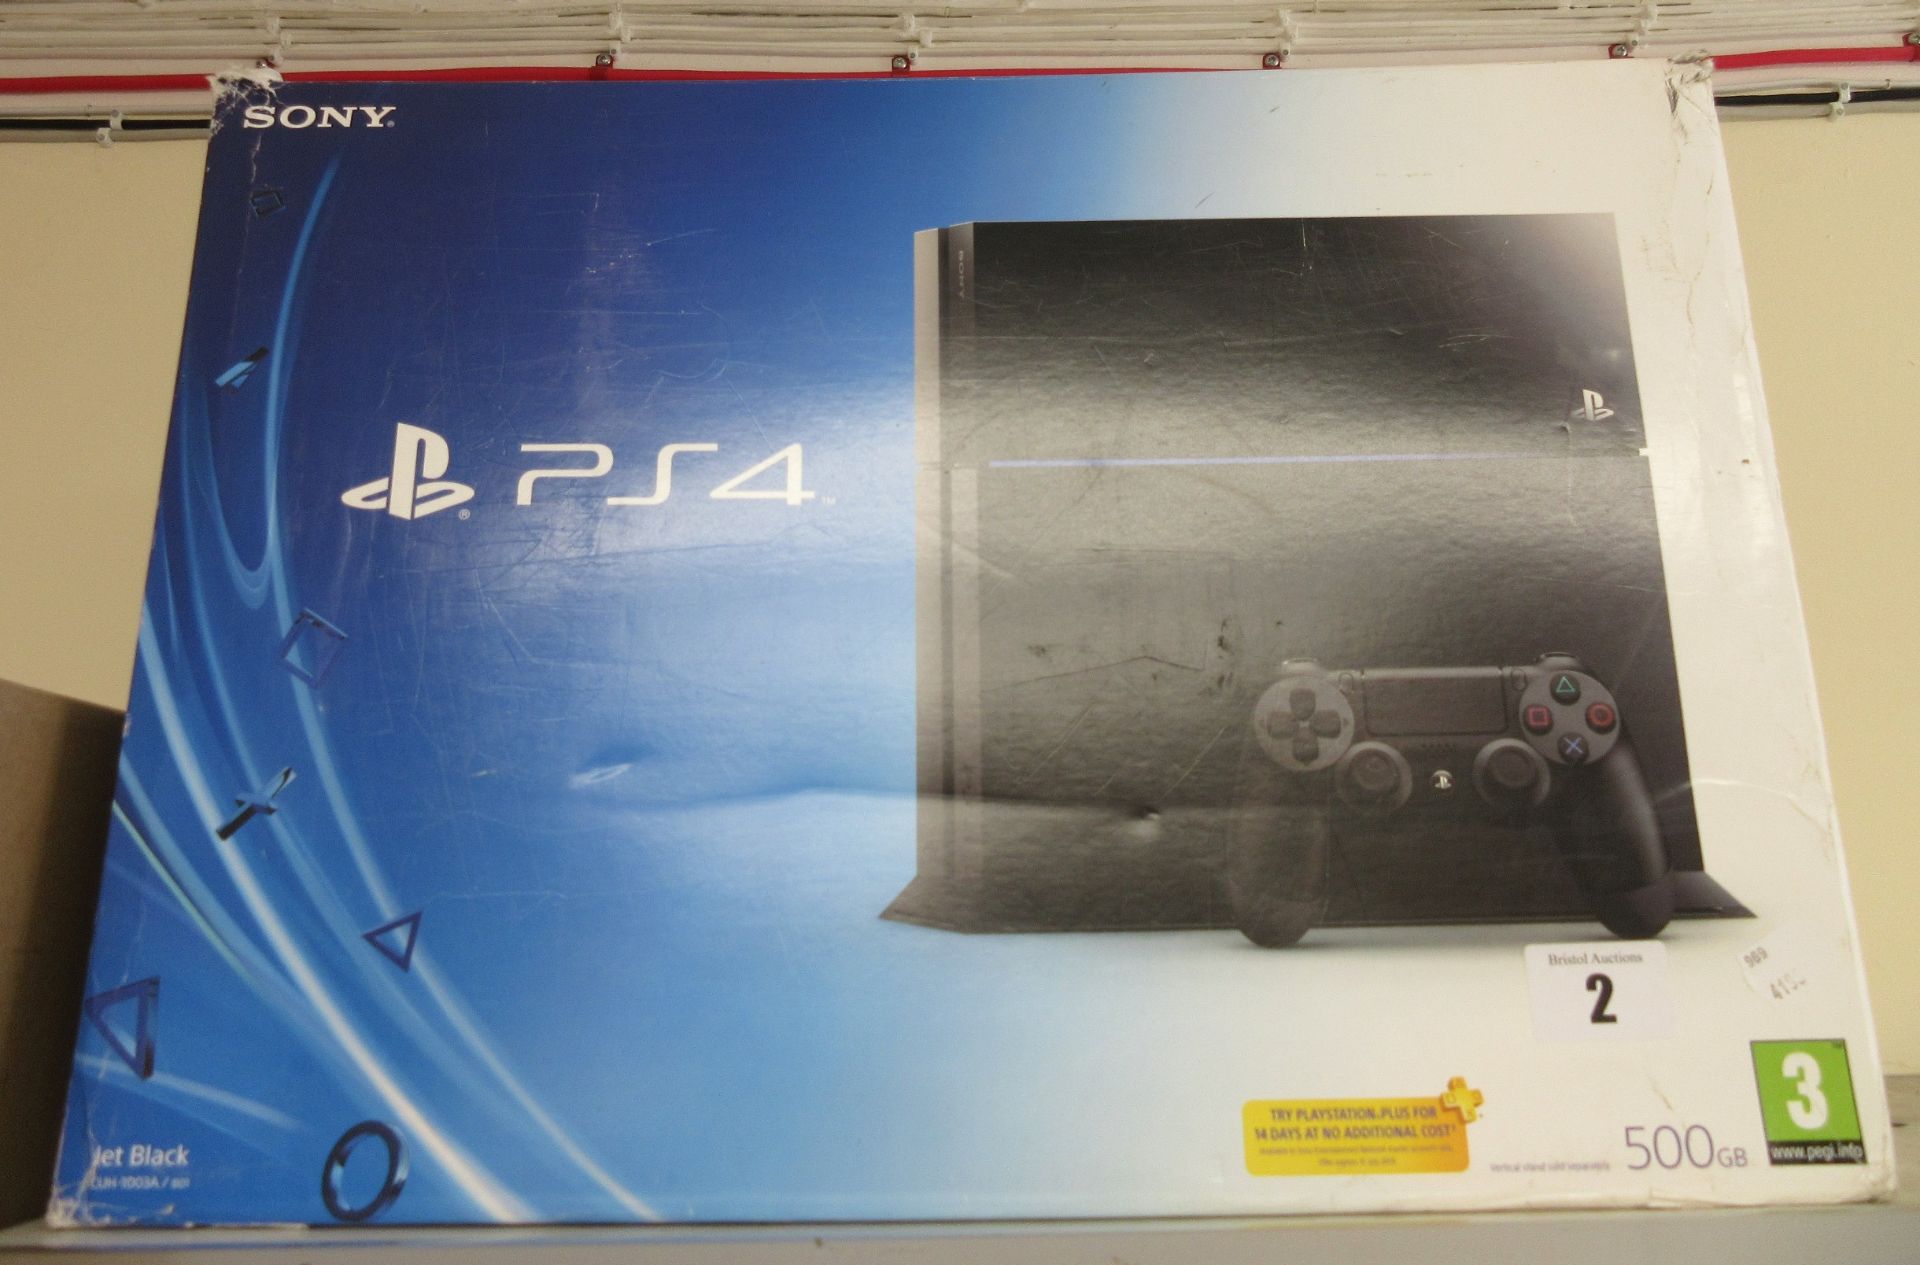 A pre-owned Sony PlayStation 4 500GB Jet Black Console and two controllers in box.